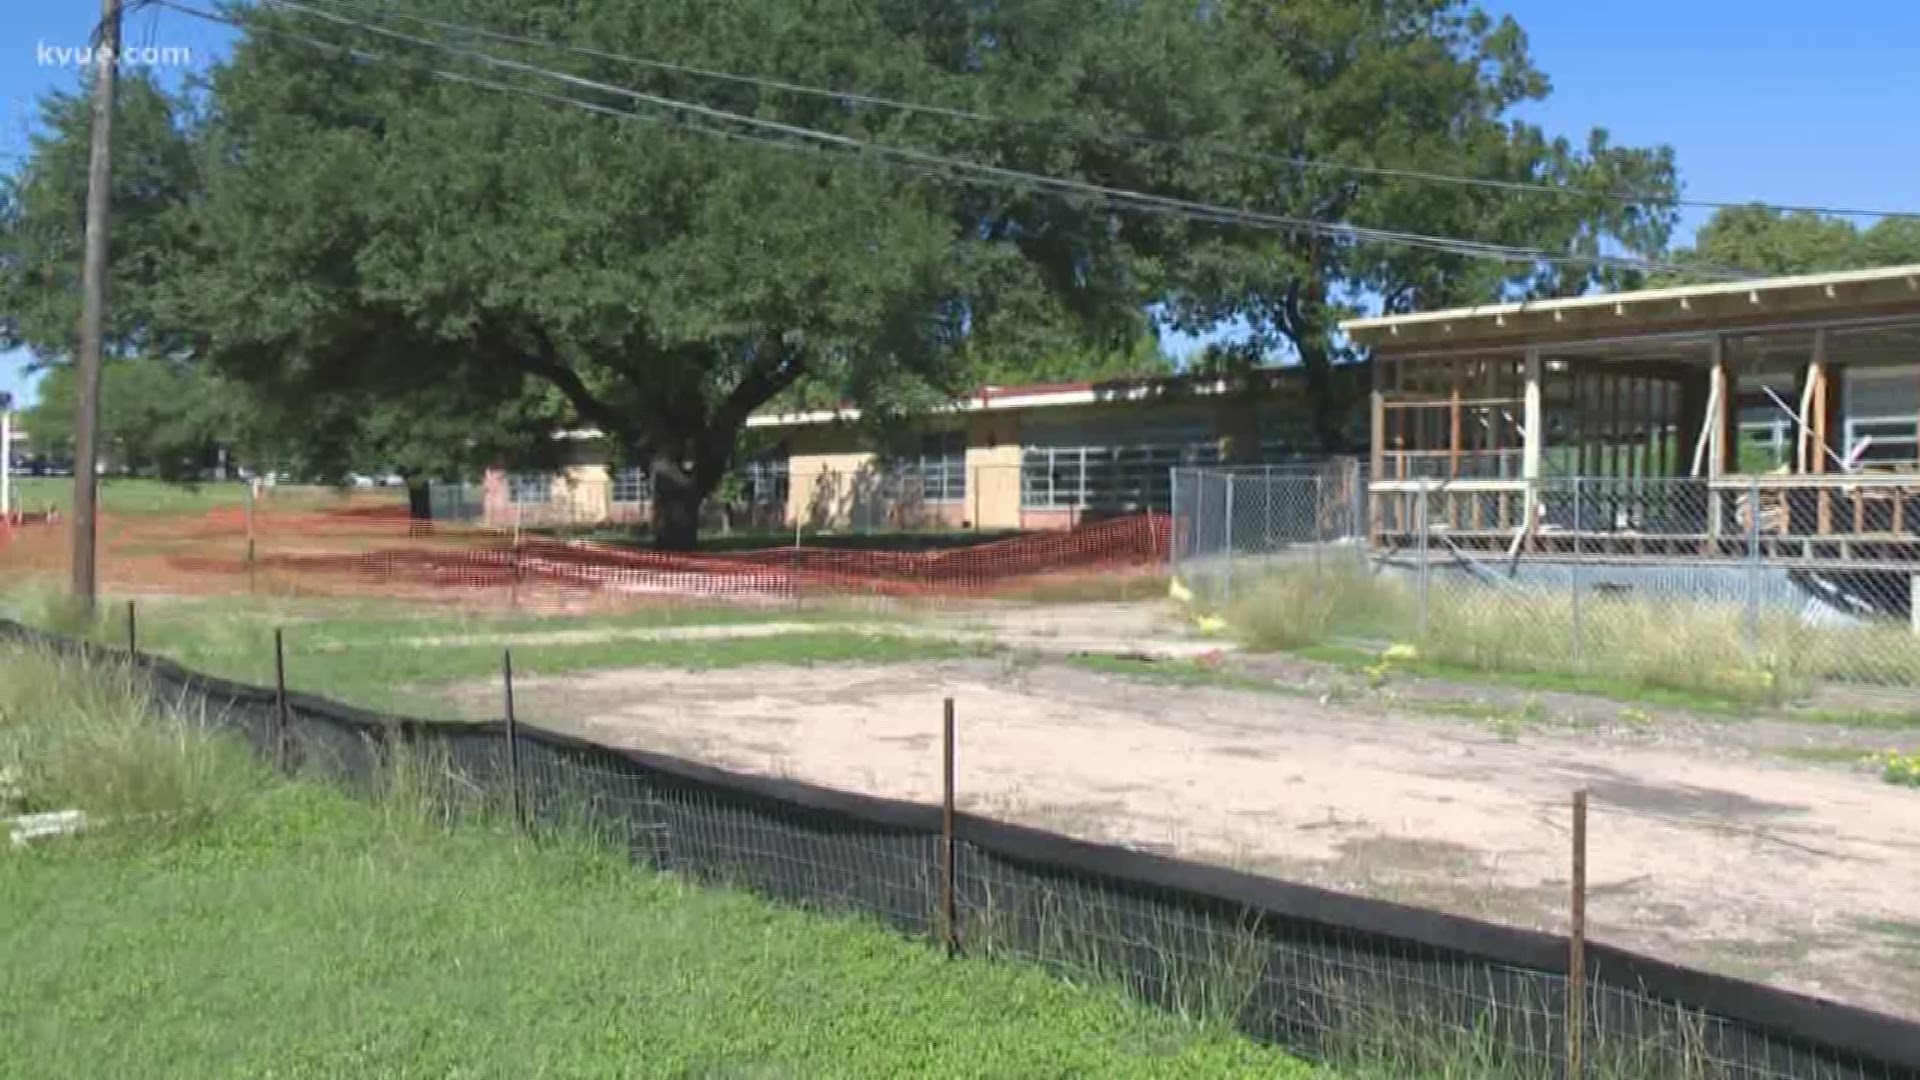 Demolition crews tomorrow are tearing down Austin ISD's T.A. Brown Elementary School. The building, deemed unsafe, was closed about a year ago and students have been relocated.